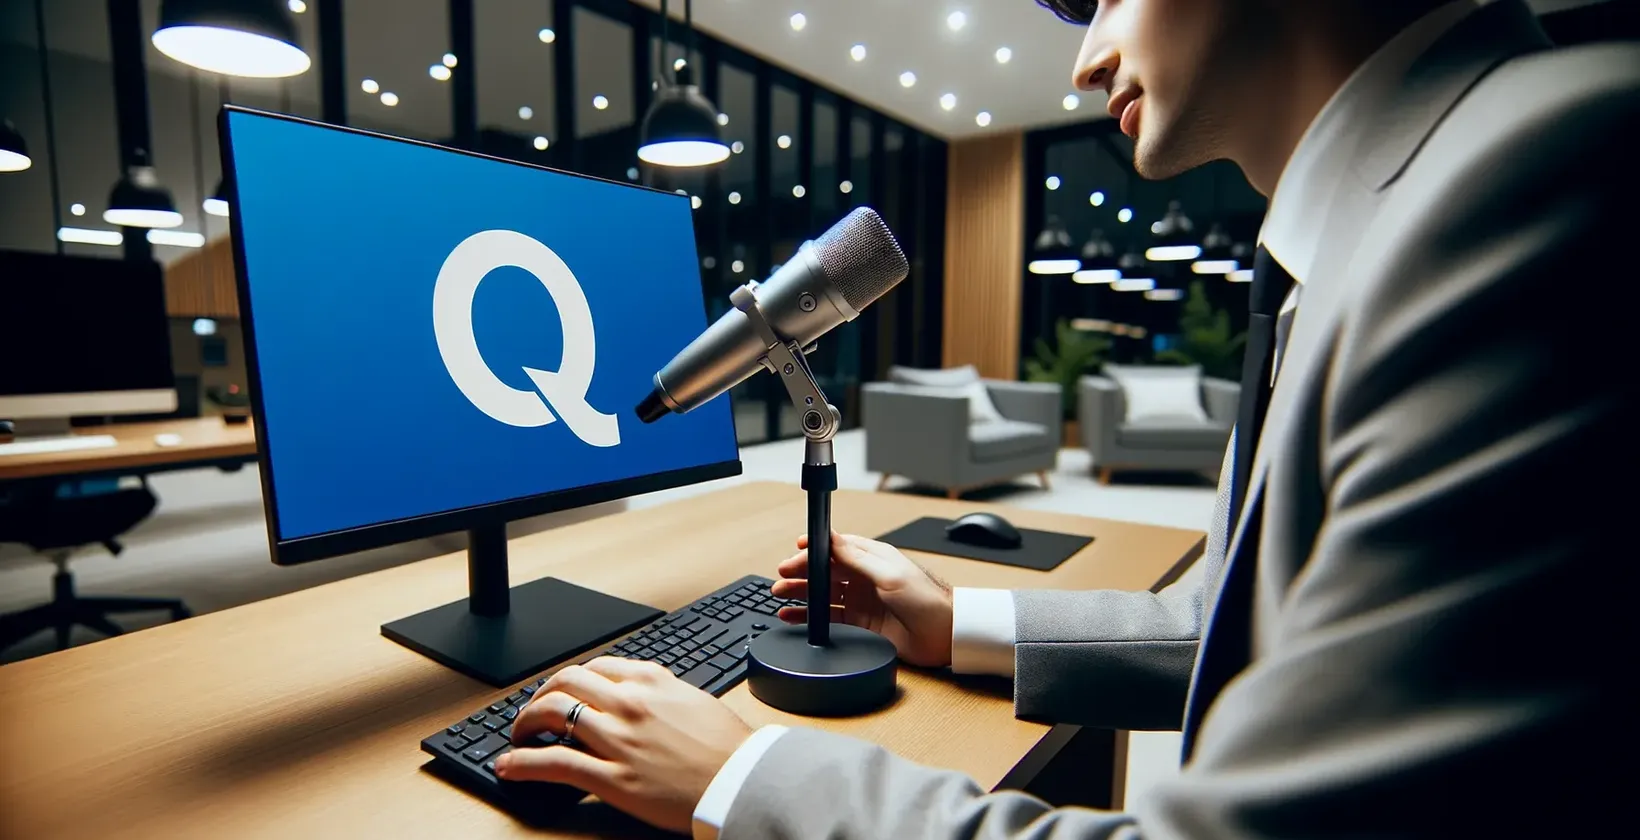 Person with mic using Dictation-in-Outlook faces monitor with a 'Q' icon suggesting voice commands.